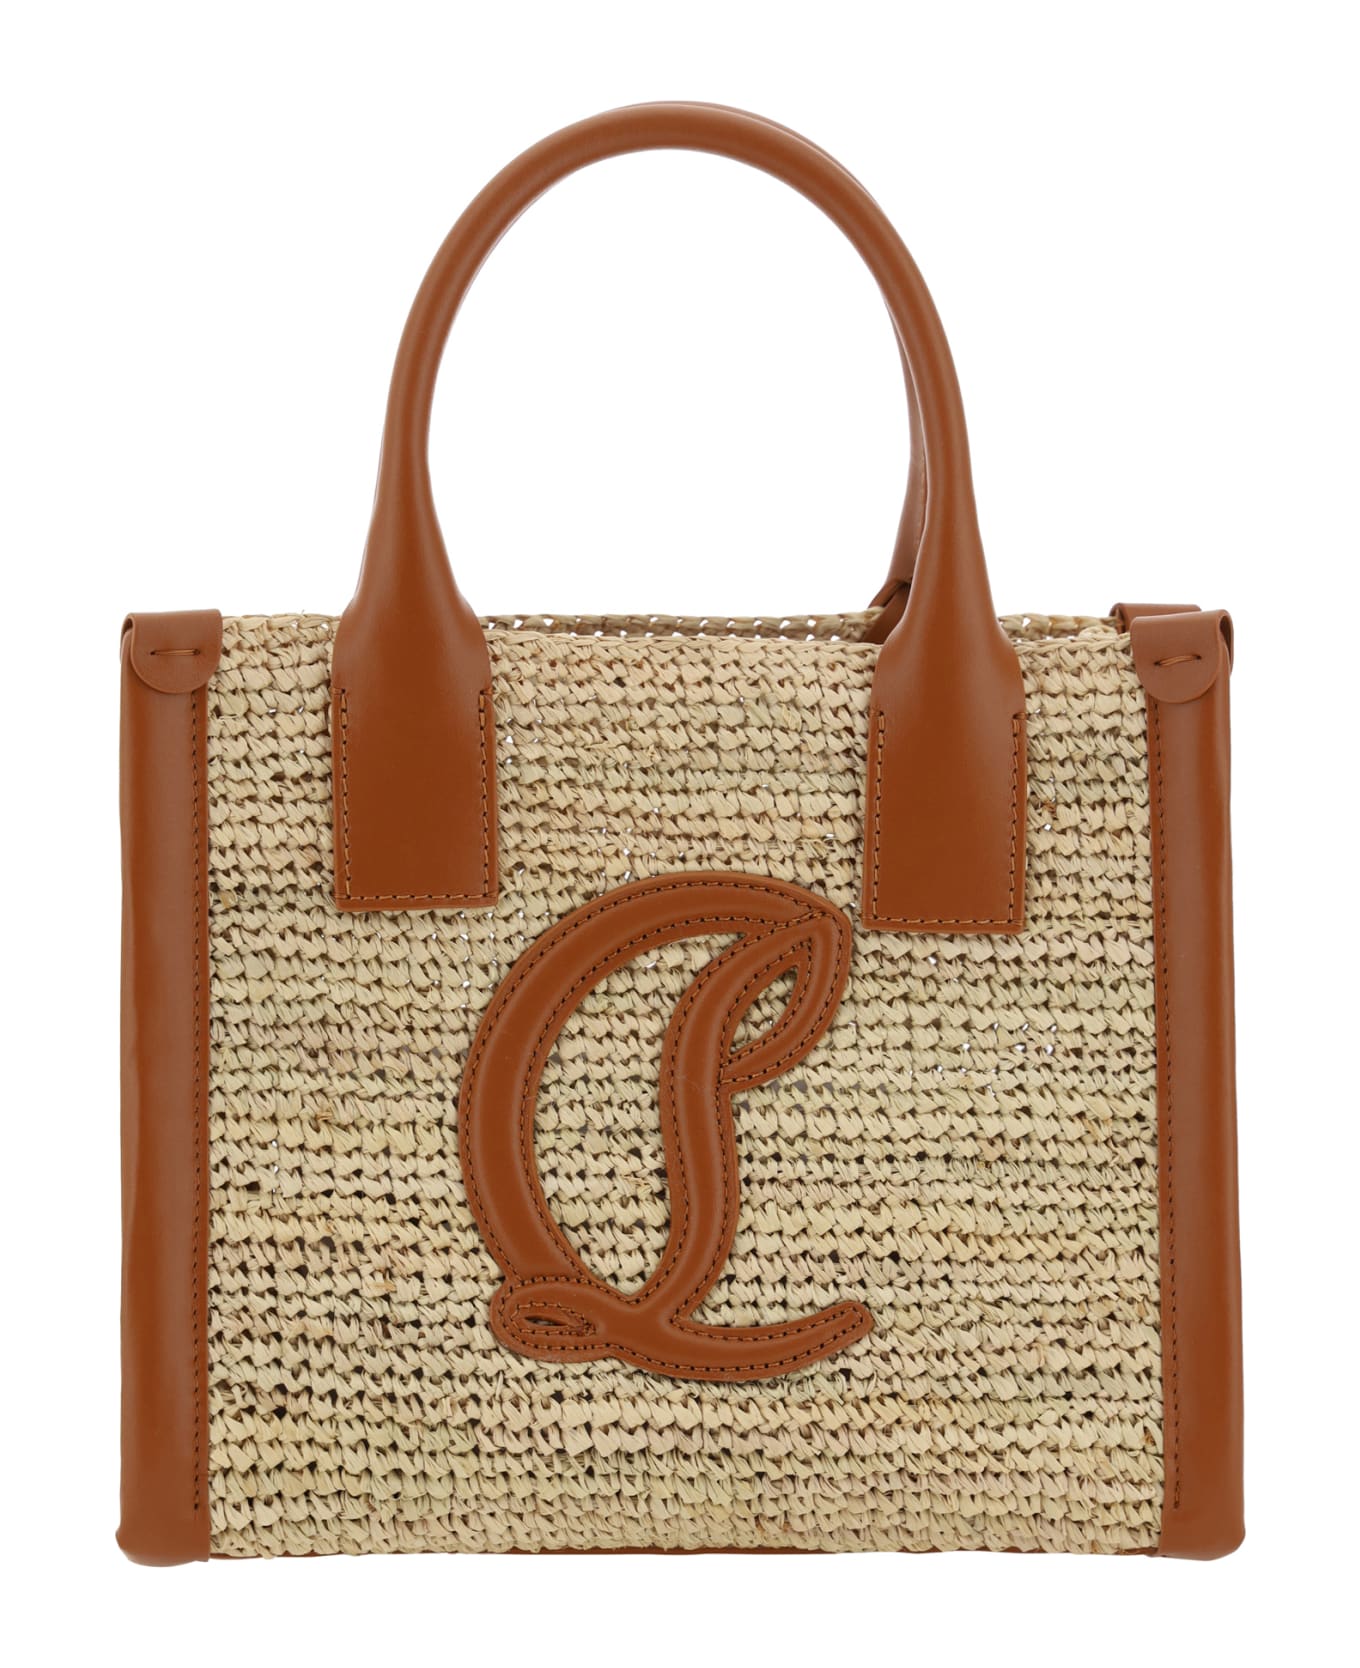 Christian Louboutin By My Side Mini Tote Handbag - Natural/cuoio トートバッグ